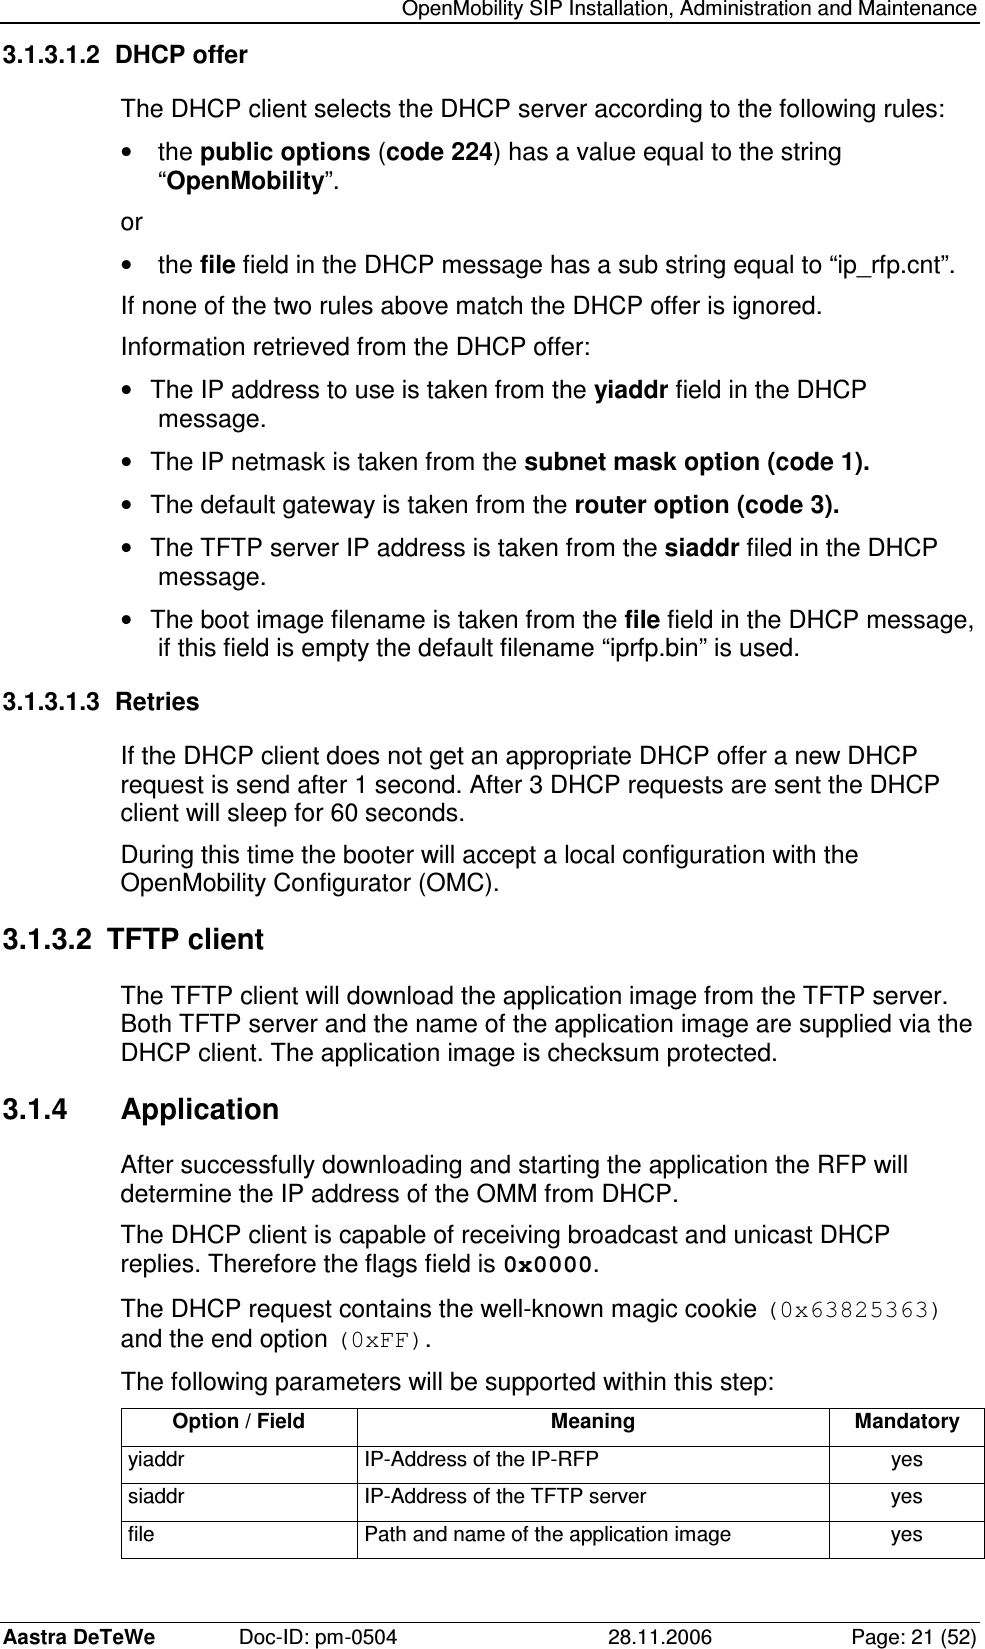   OpenMobility SIP Installation, Administration and Maintenance Aastra DeTeWe  Doc-ID: pm-0504  28.11.2006  Page: 21 (52) 3.1.3.1.2  DHCP offer The DHCP client selects the DHCP server according to the following rules: •  the public options (code 224) has a value equal to the string “OpenMobility”. or •  the file field in the DHCP message has a sub string equal to “ip_rfp.cnt”. If none of the two rules above match the DHCP offer is ignored. Information retrieved from the DHCP offer: •  The IP address to use is taken from the yiaddr field in the DHCP message. •  The IP netmask is taken from the subnet mask option (code 1). •  The default gateway is taken from the router option (code 3). •  The TFTP server IP address is taken from the siaddr filed in the DHCP message. •  The boot image filename is taken from the file field in the DHCP message, if this field is empty the default filename “iprfp.bin” is used. 3.1.3.1.3  Retries If the DHCP client does not get an appropriate DHCP offer a new DHCP request is send after 1 second. After 3 DHCP requests are sent the DHCP client will sleep for 60 seconds. During this time the booter will accept a local configuration with the OpenMobility Configurator (OMC). 3.1.3.2  TFTP client The TFTP client will download the application image from the TFTP server. Both TFTP server and the name of the application image are supplied via the DHCP client. The application image is checksum protected. 3.1.4  Application After successfully downloading and starting the application the RFP will determine the IP address of the OMM from DHCP. The DHCP client is capable of receiving broadcast and unicast DHCP replies. Therefore the flags field is 0x0000. The DHCP request contains the well-known magic cookie (0x63825363) and the end option (0xFF). The following parameters will be supported within this step: Option / Field  Meaning  Mandatory yiaddr  IP-Address of the IP-RFP  yes siaddr  IP-Address of the TFTP server  yes file  Path and name of the application image  yes 